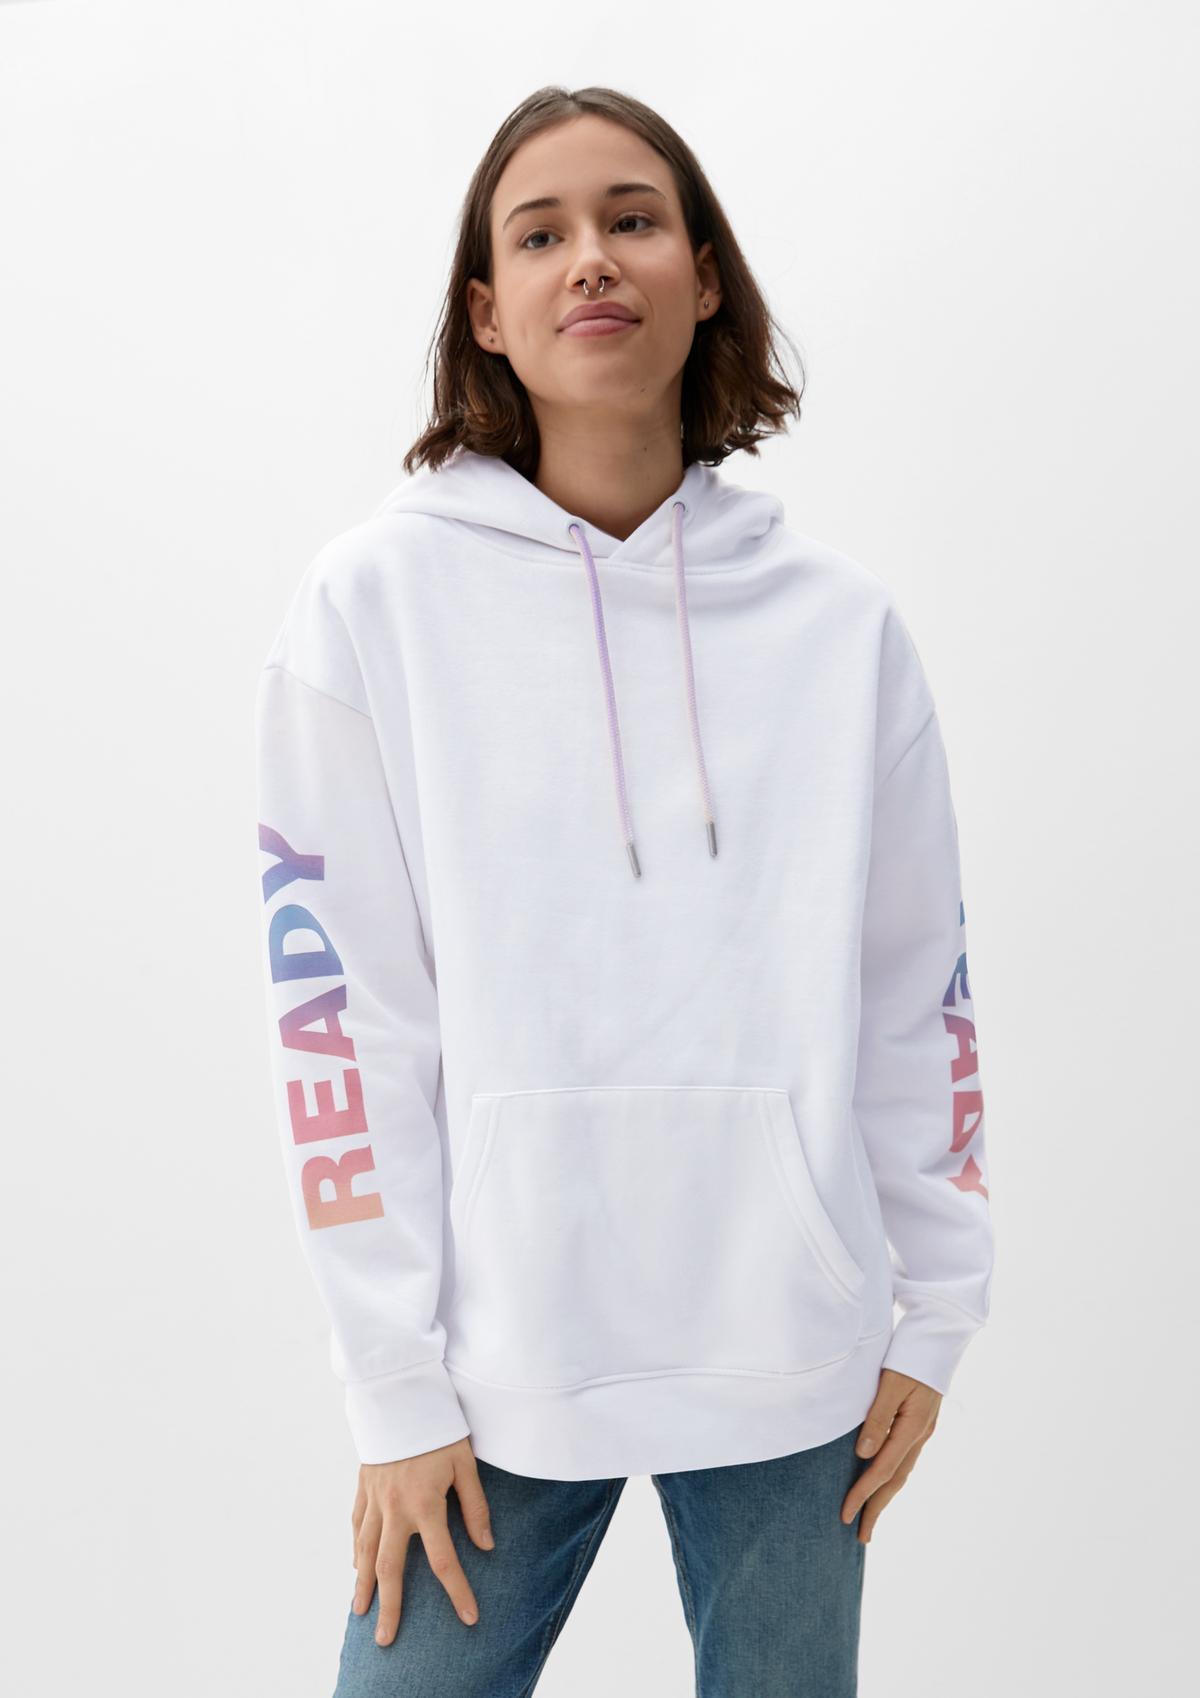 Hooded sweatshirt with white print back - a